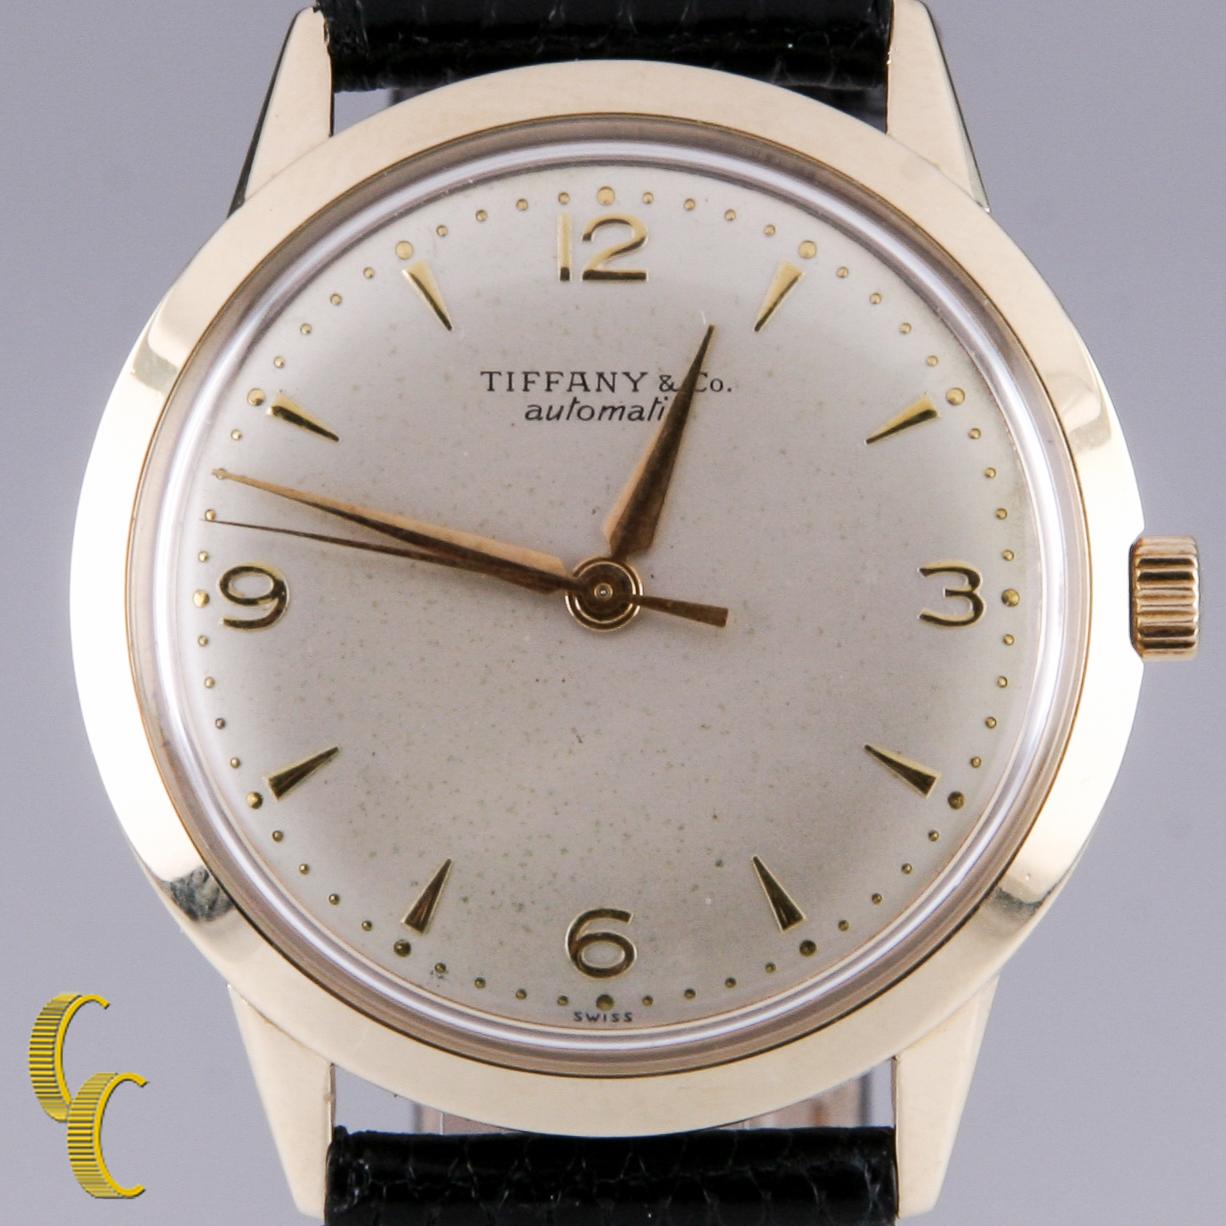 17 Jewel Tiffany & Co. Automatic Movement
Movement #AS.1580
Case #R4581-3285
14k Yellow Gold Case
33 mm in Diameter (35 mm w/ Crown)
Lug-to-Lug Length = 38 mm
Lug-to-Lug Width = 17 mm
Champagne Dial w/ Gold Numbers, Tic Marks, and Hands (S, M, H)
28